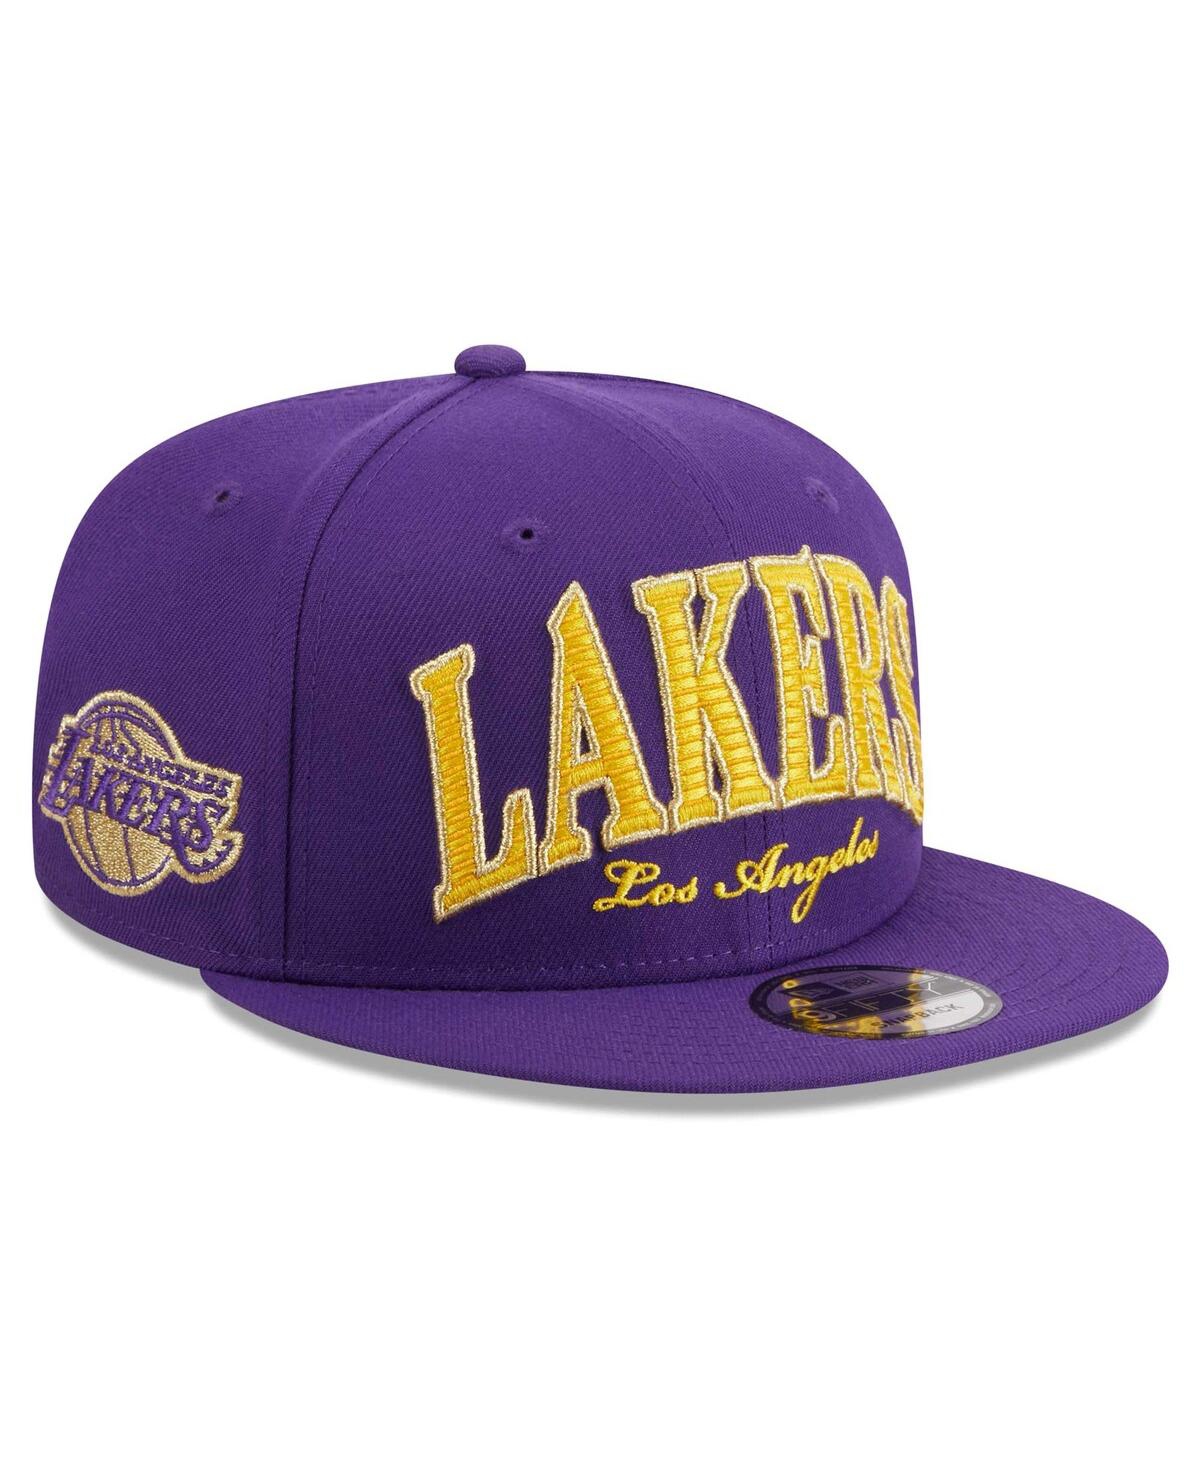 New Era Men's  Purple Los Angeles Lakers Golden Tall Text 9fifty Snapback Hat